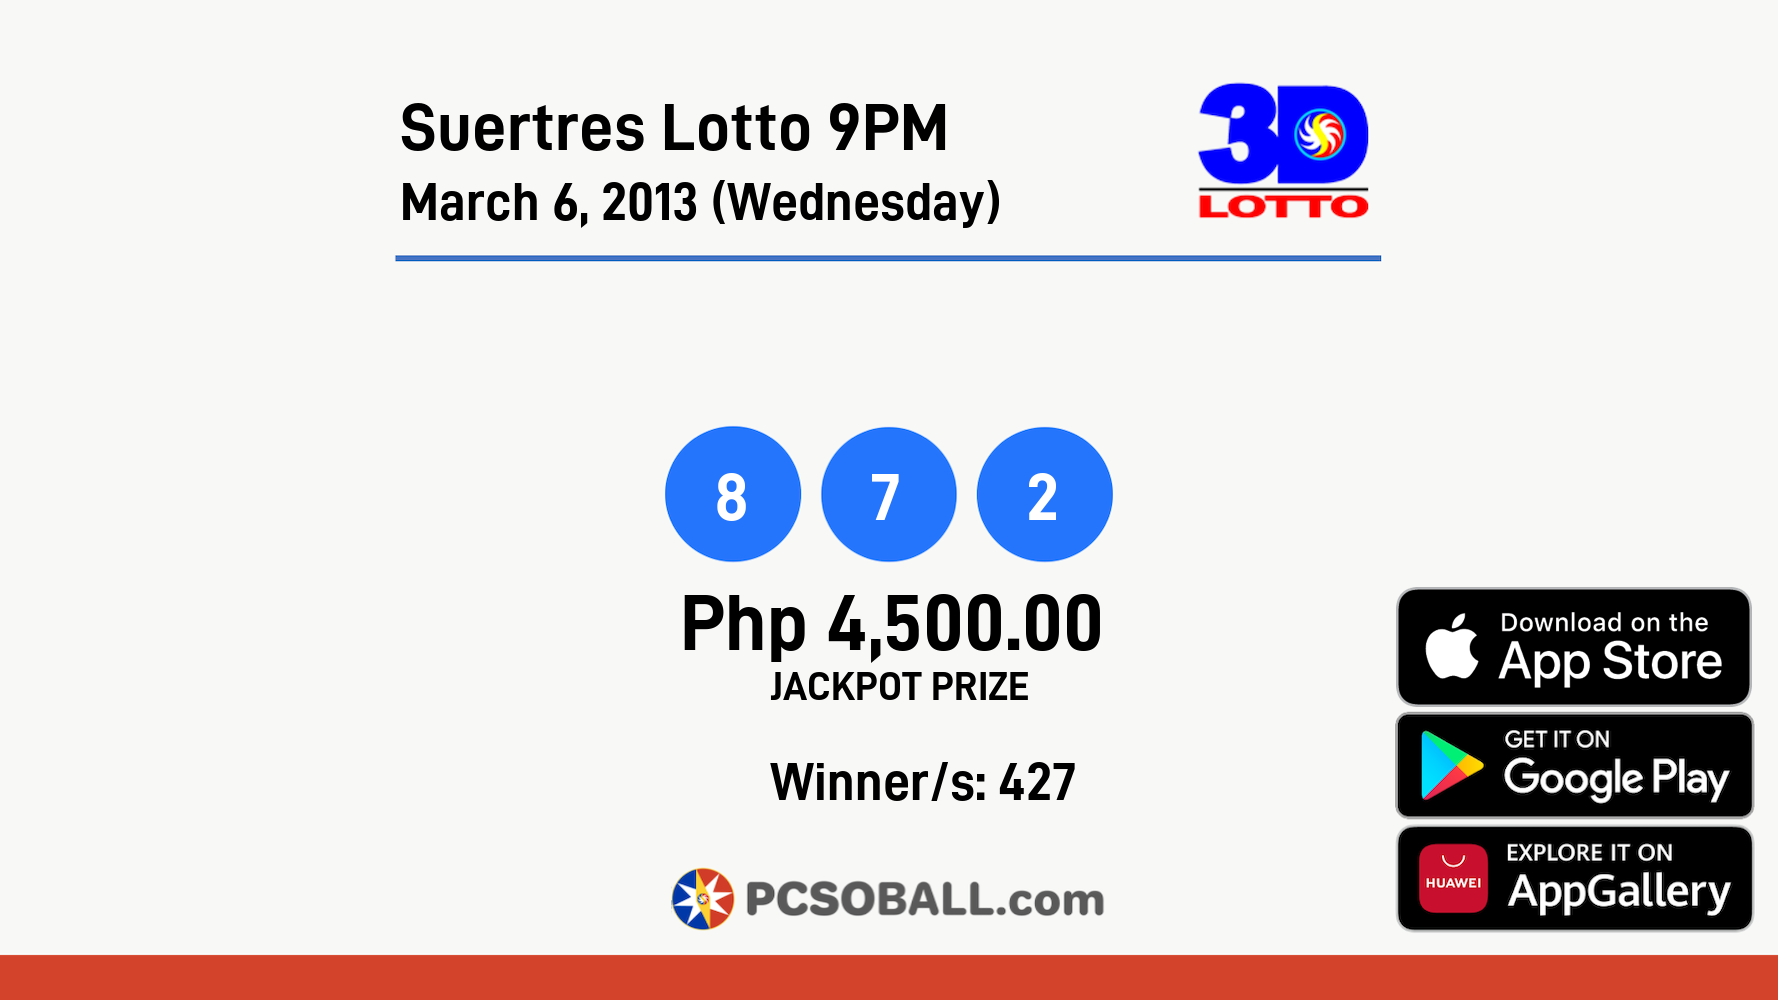 Suertres Lotto 9PM March 6, 2013 (Wednesday) Result